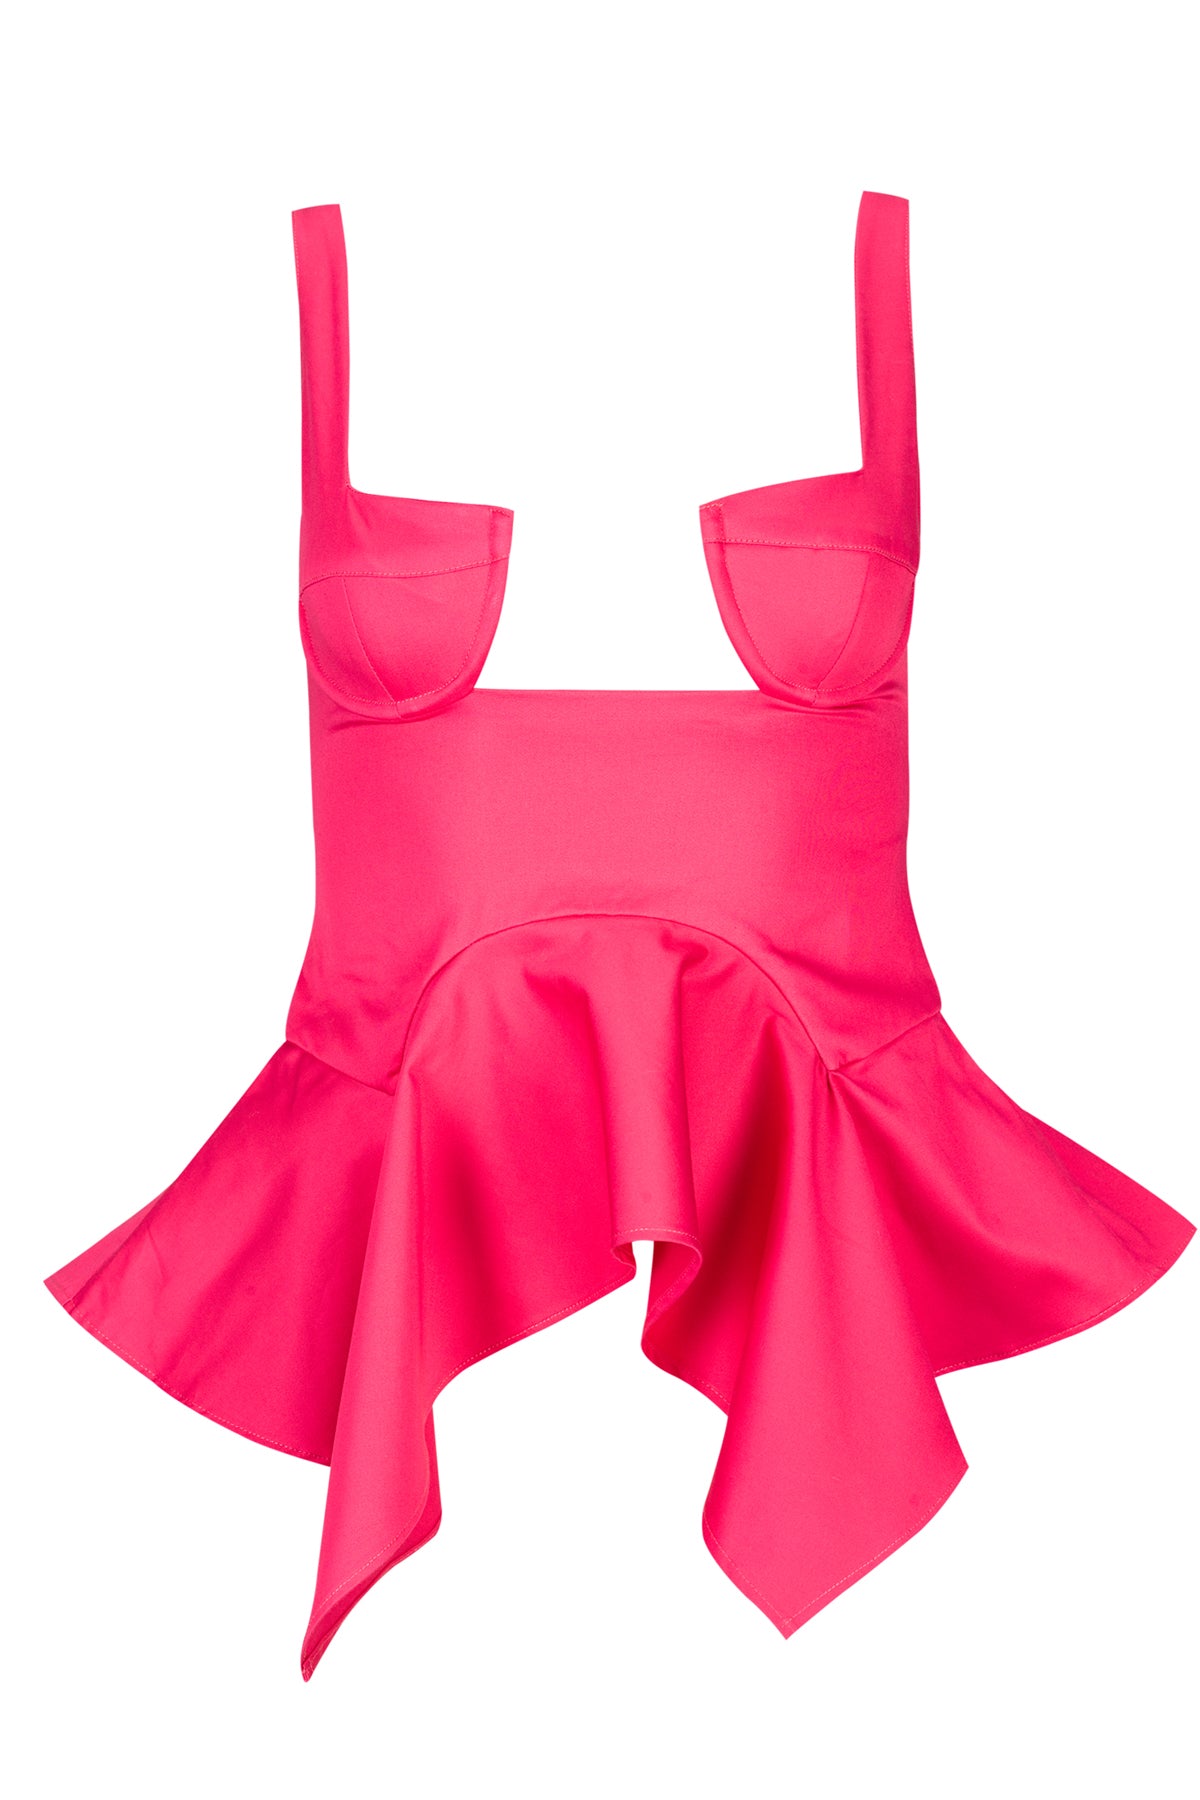 PINK STRAP CORSET WITH WAIST FLOUNCE marques almeida